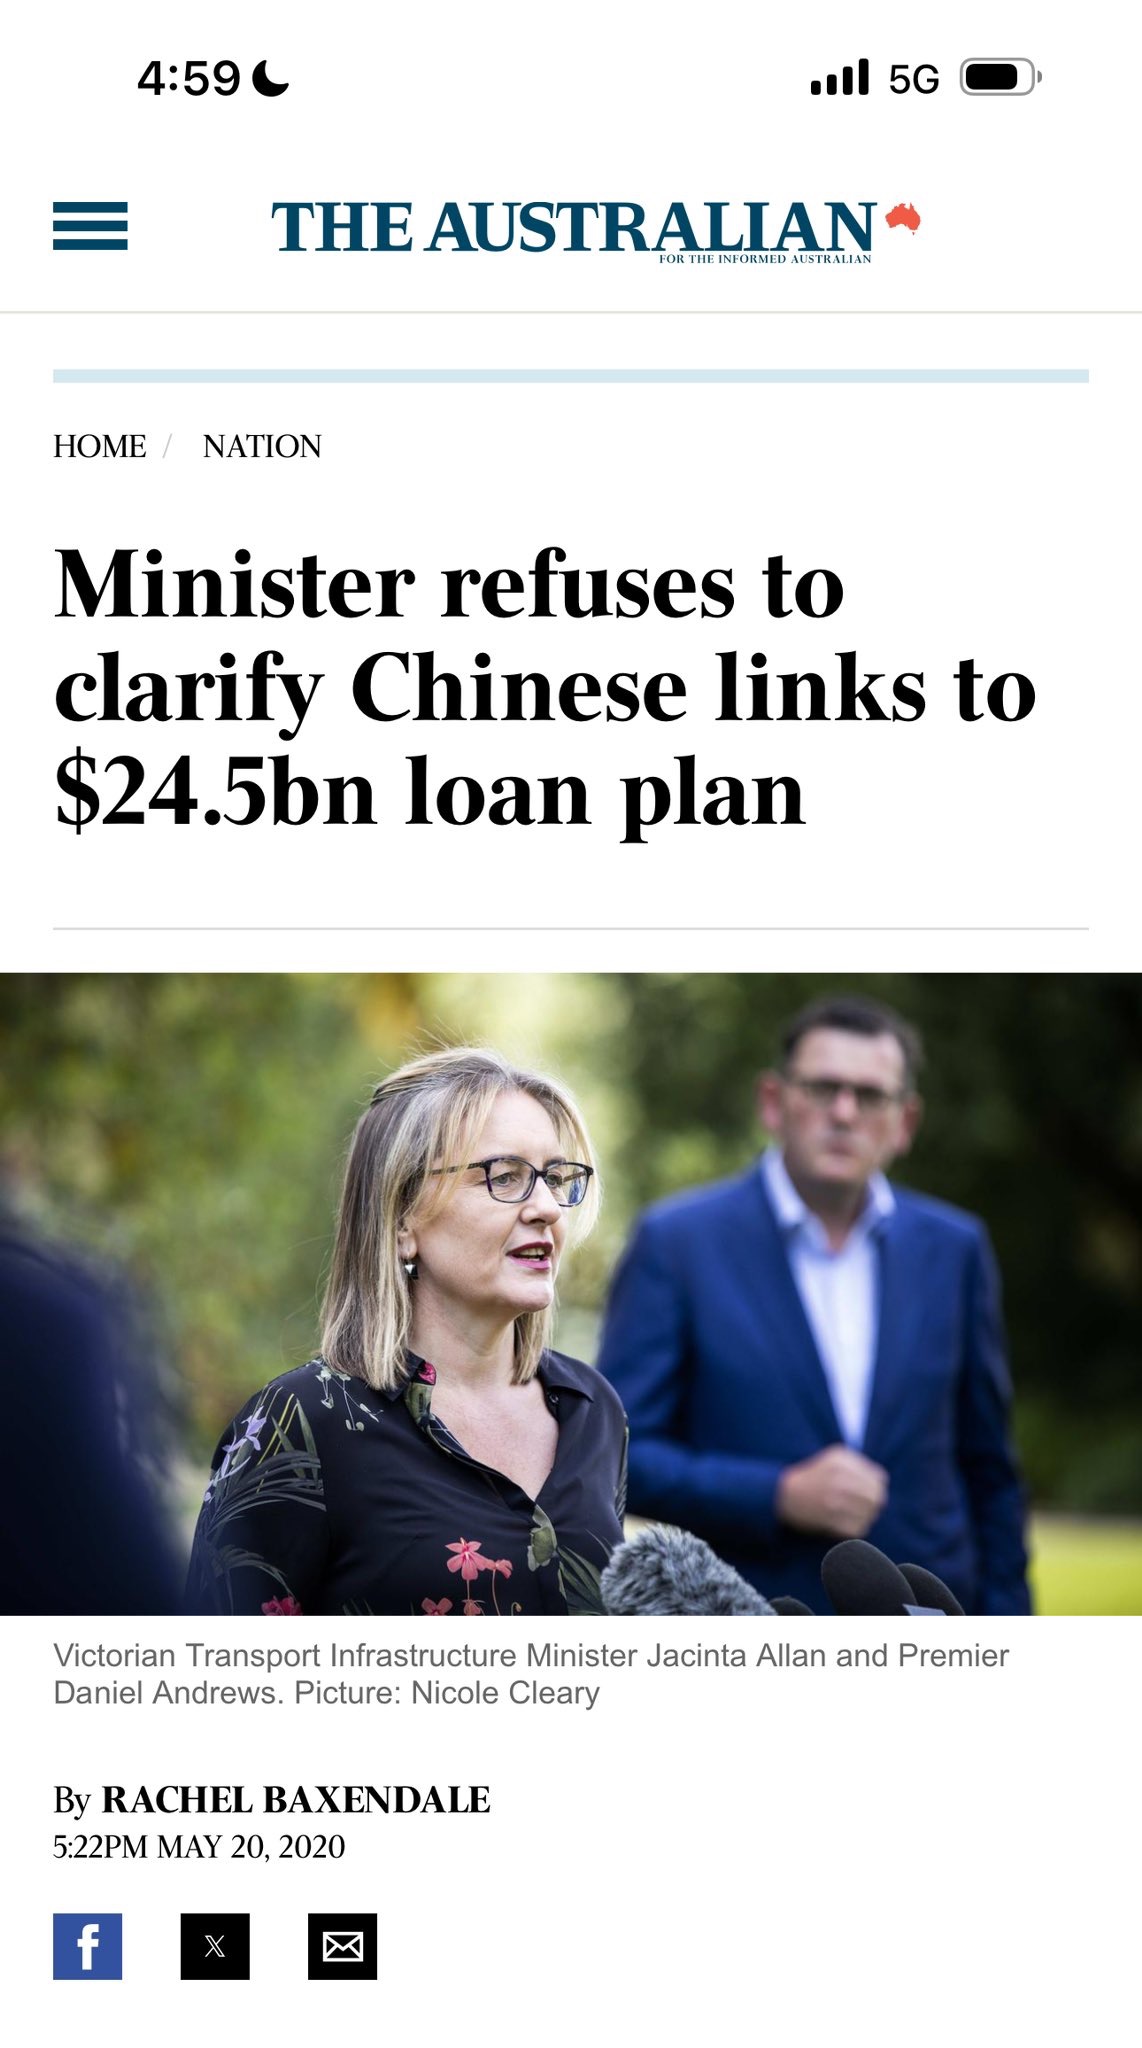 Is Victoria borrowing money from China?